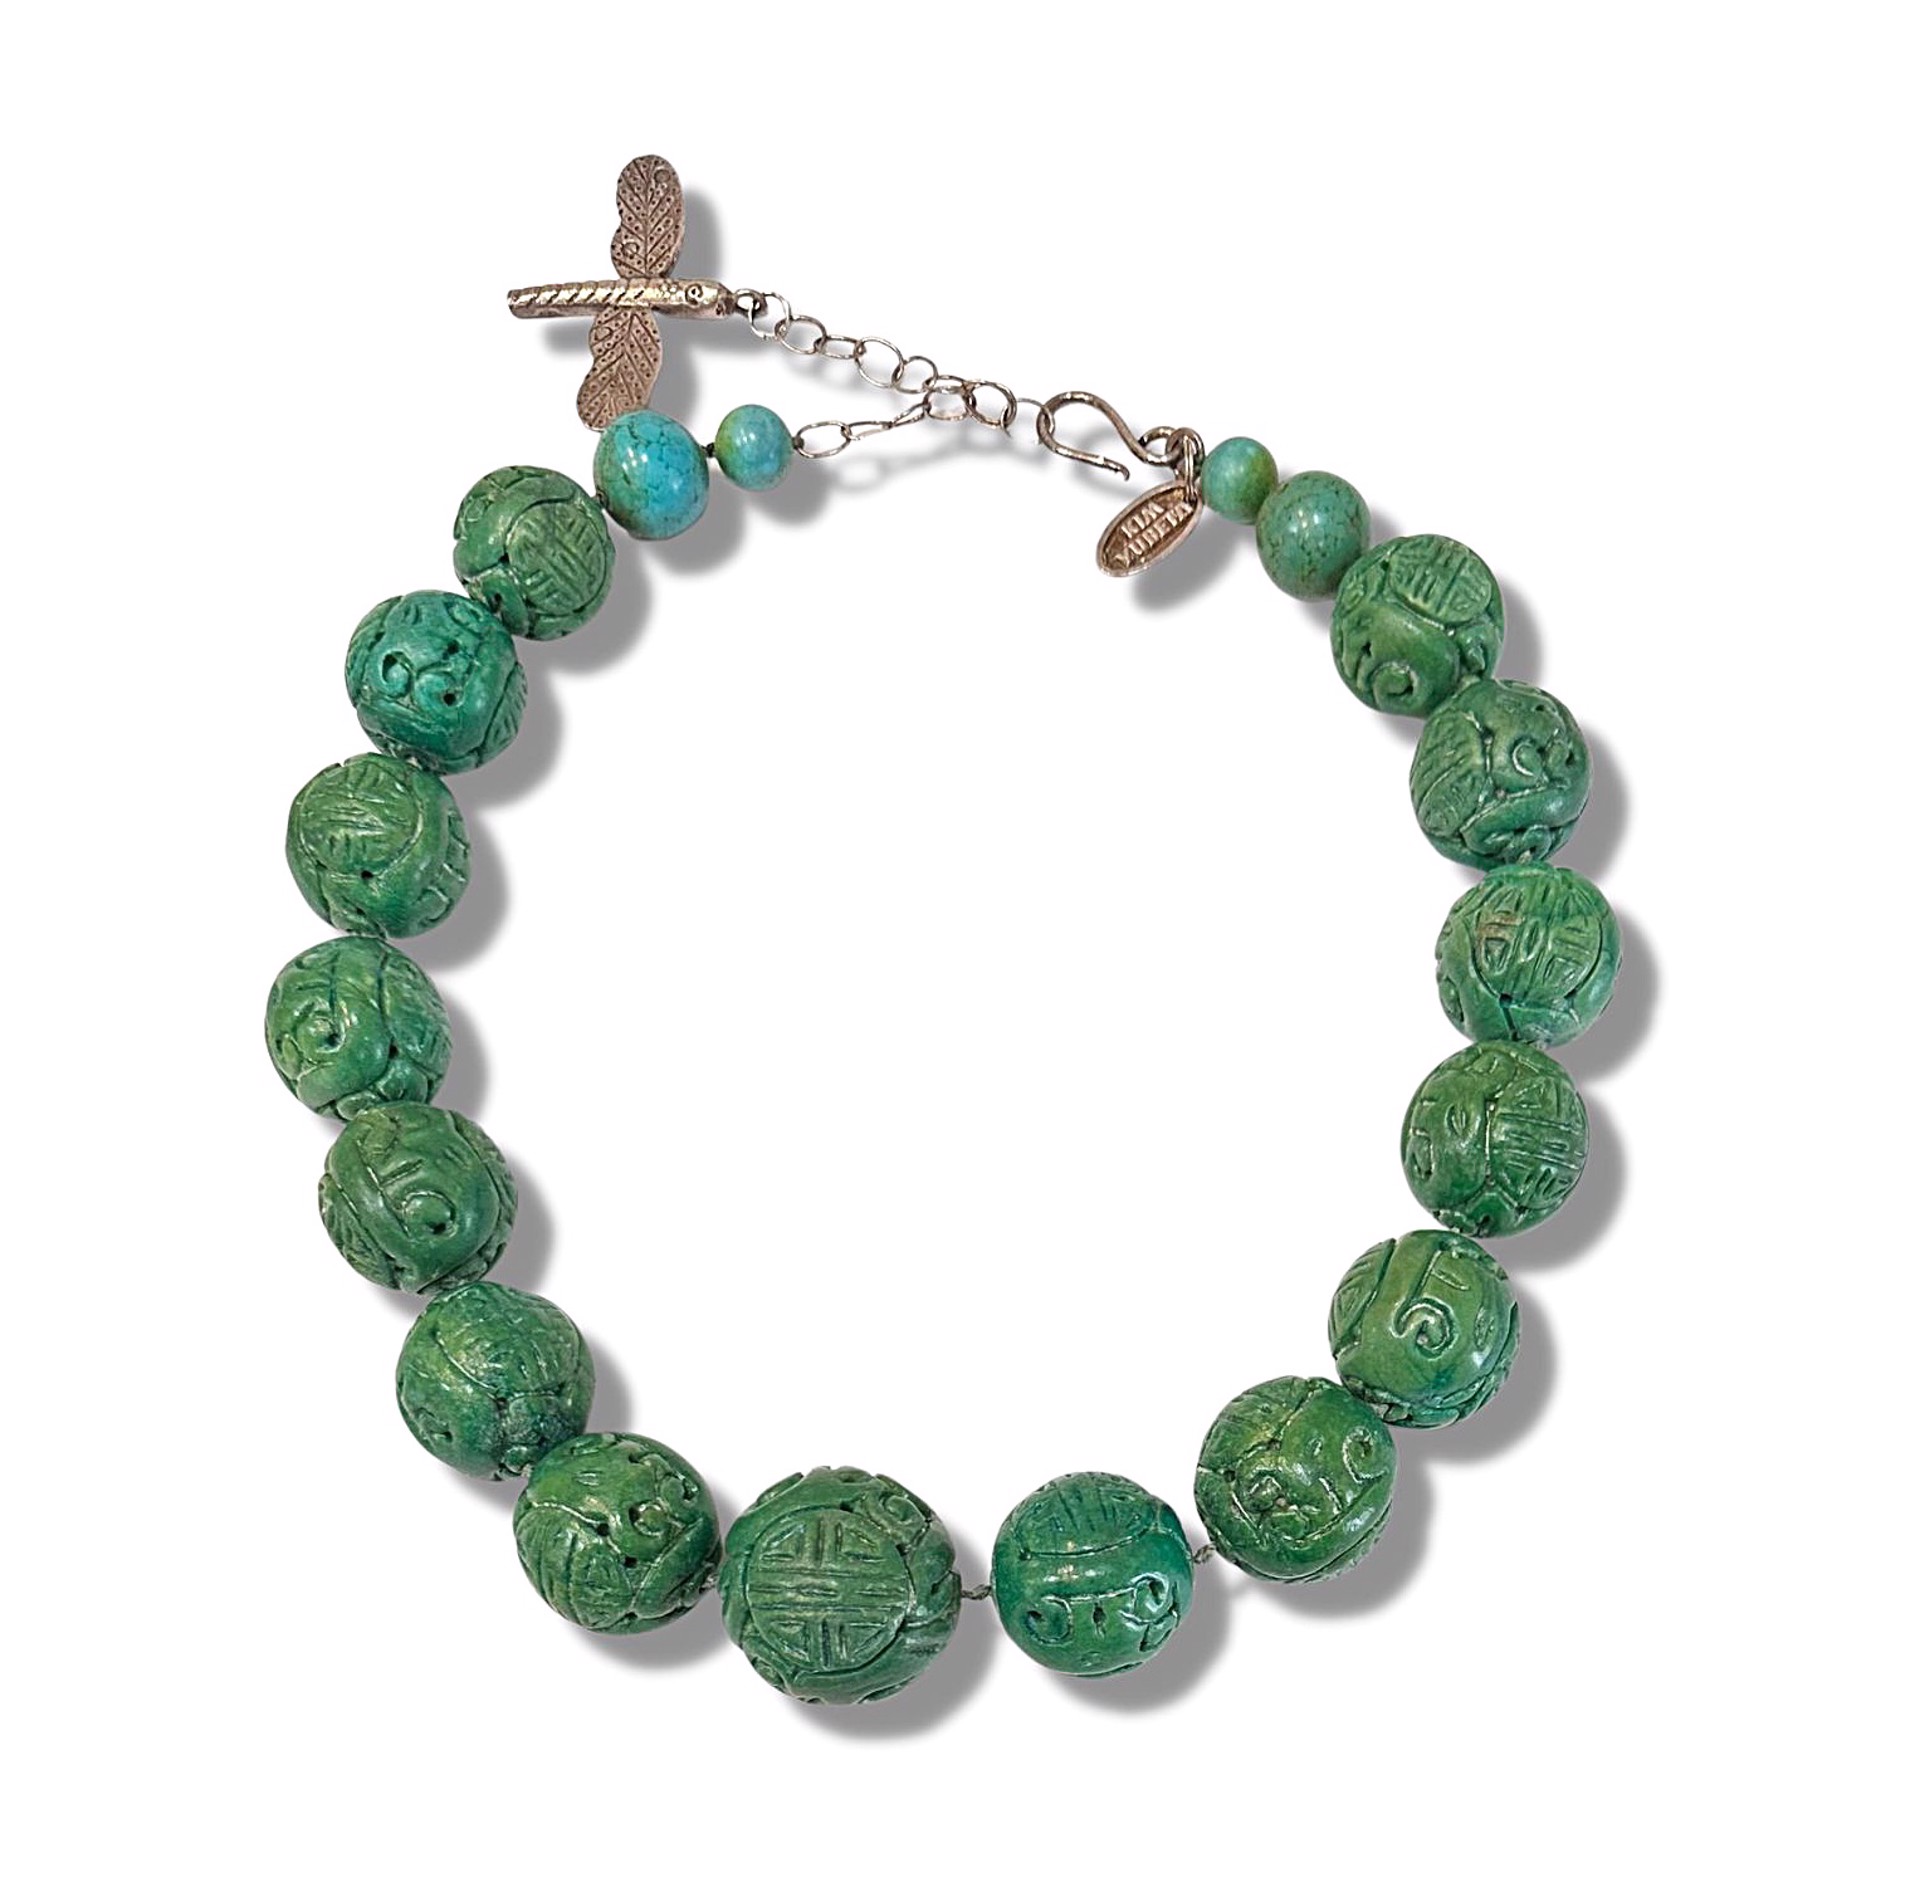 Necklace - Carved Turquoise Beads with Sterling Clasp #60 by Kim Yubeta